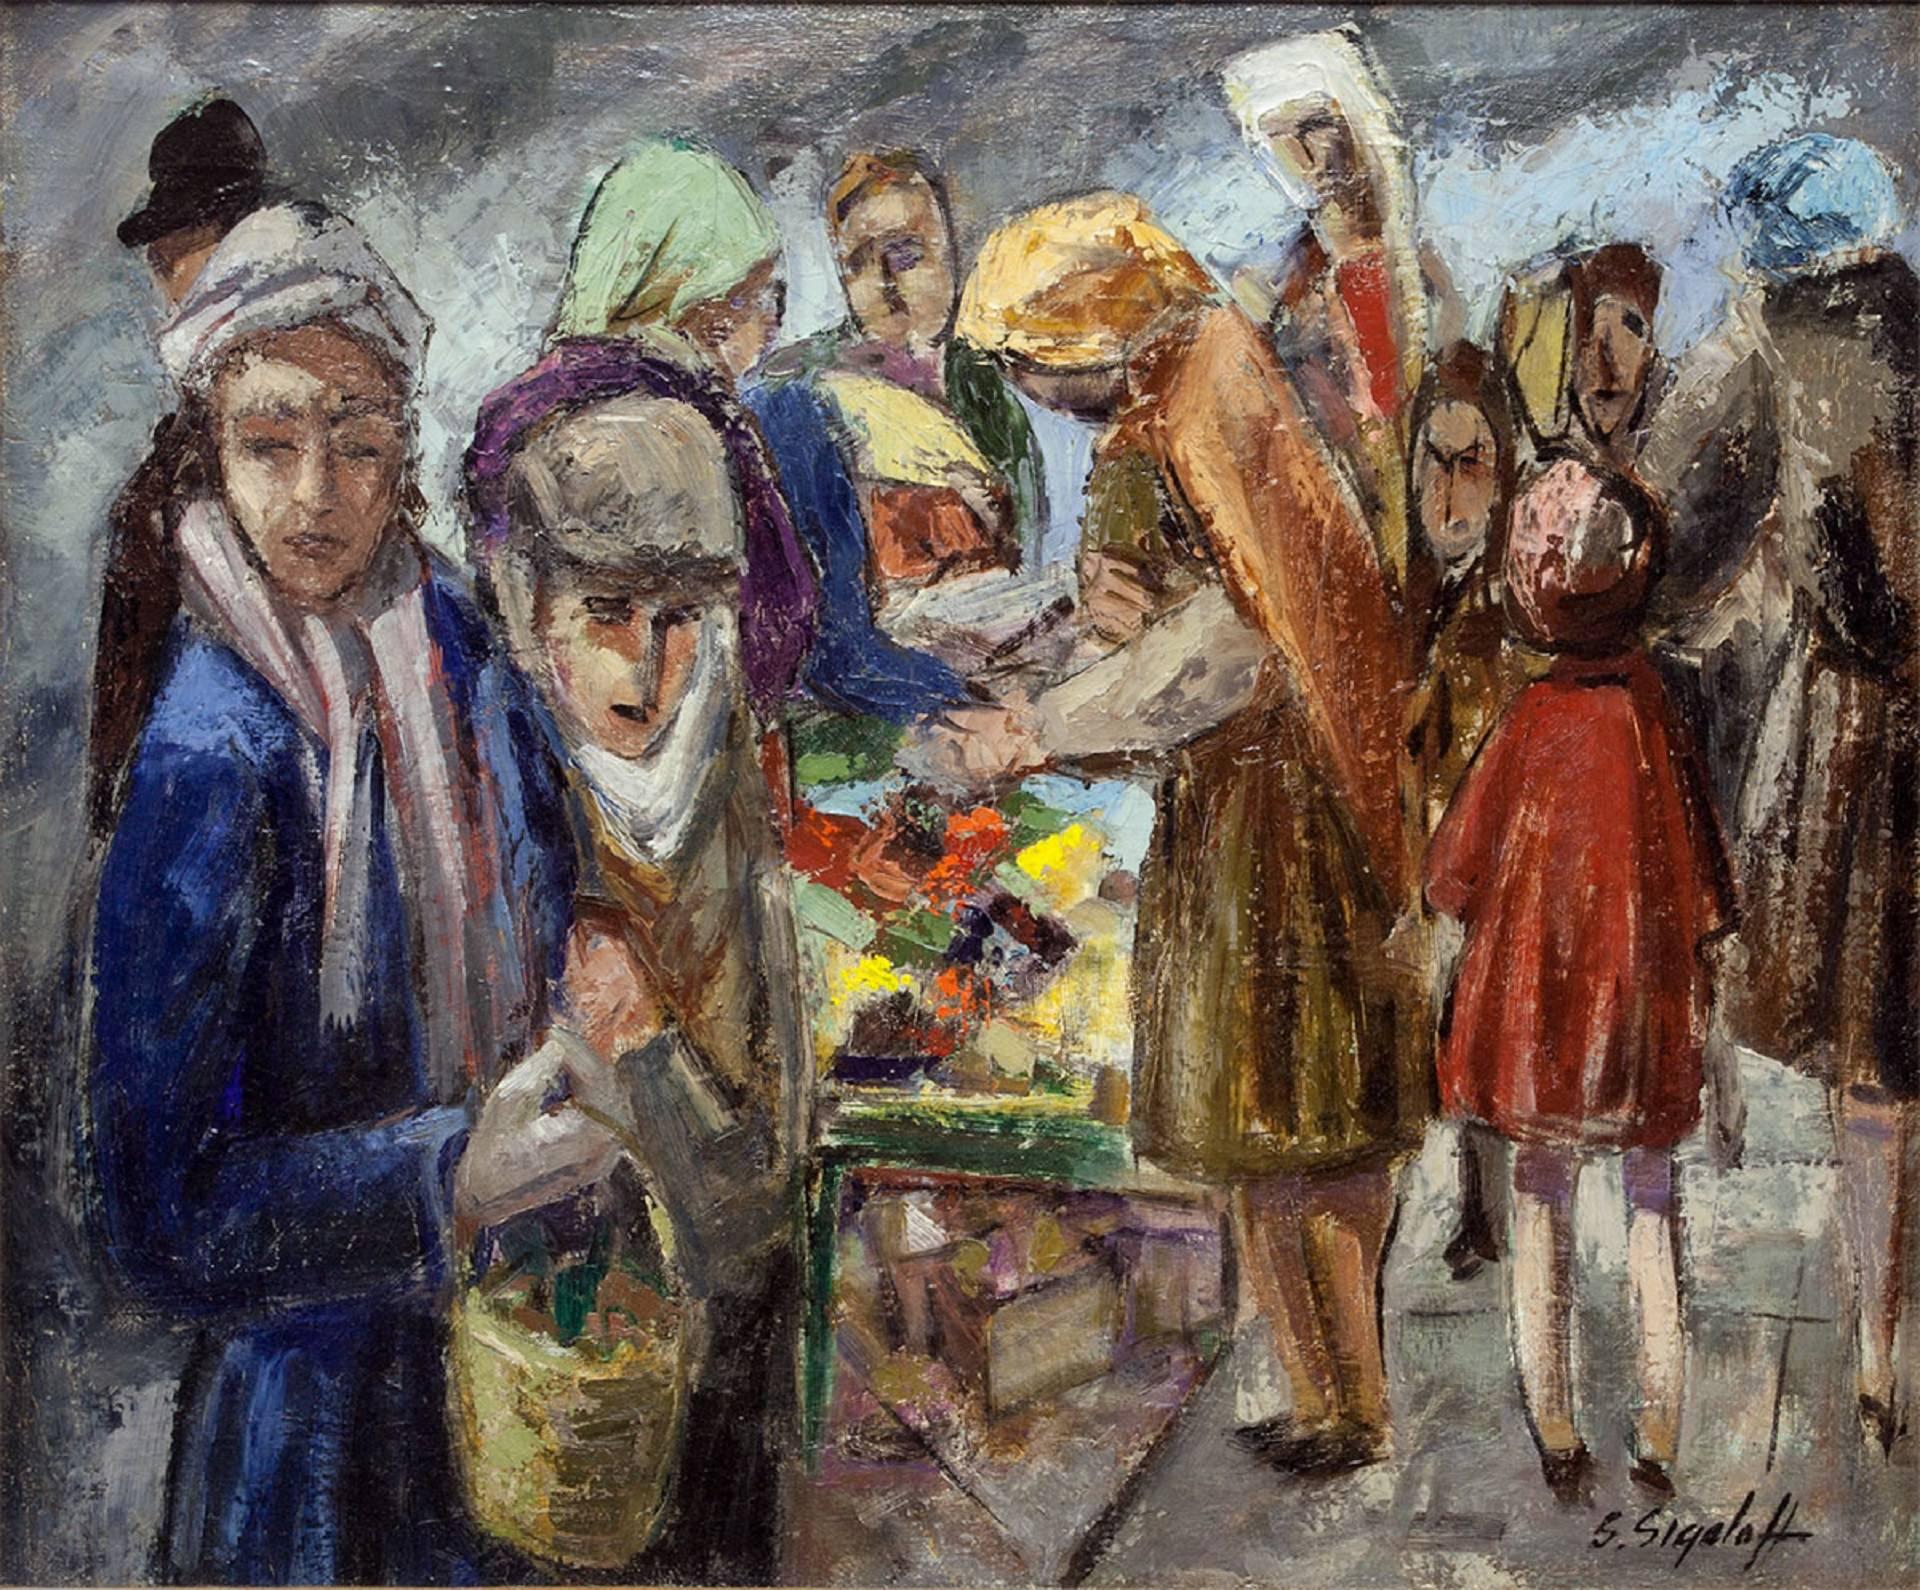 Jewish Peddlers on Market Day Modernist Judaica OIl Painting Cubist Abstraction - Brown Figurative Painting by Samuel Sigaloff